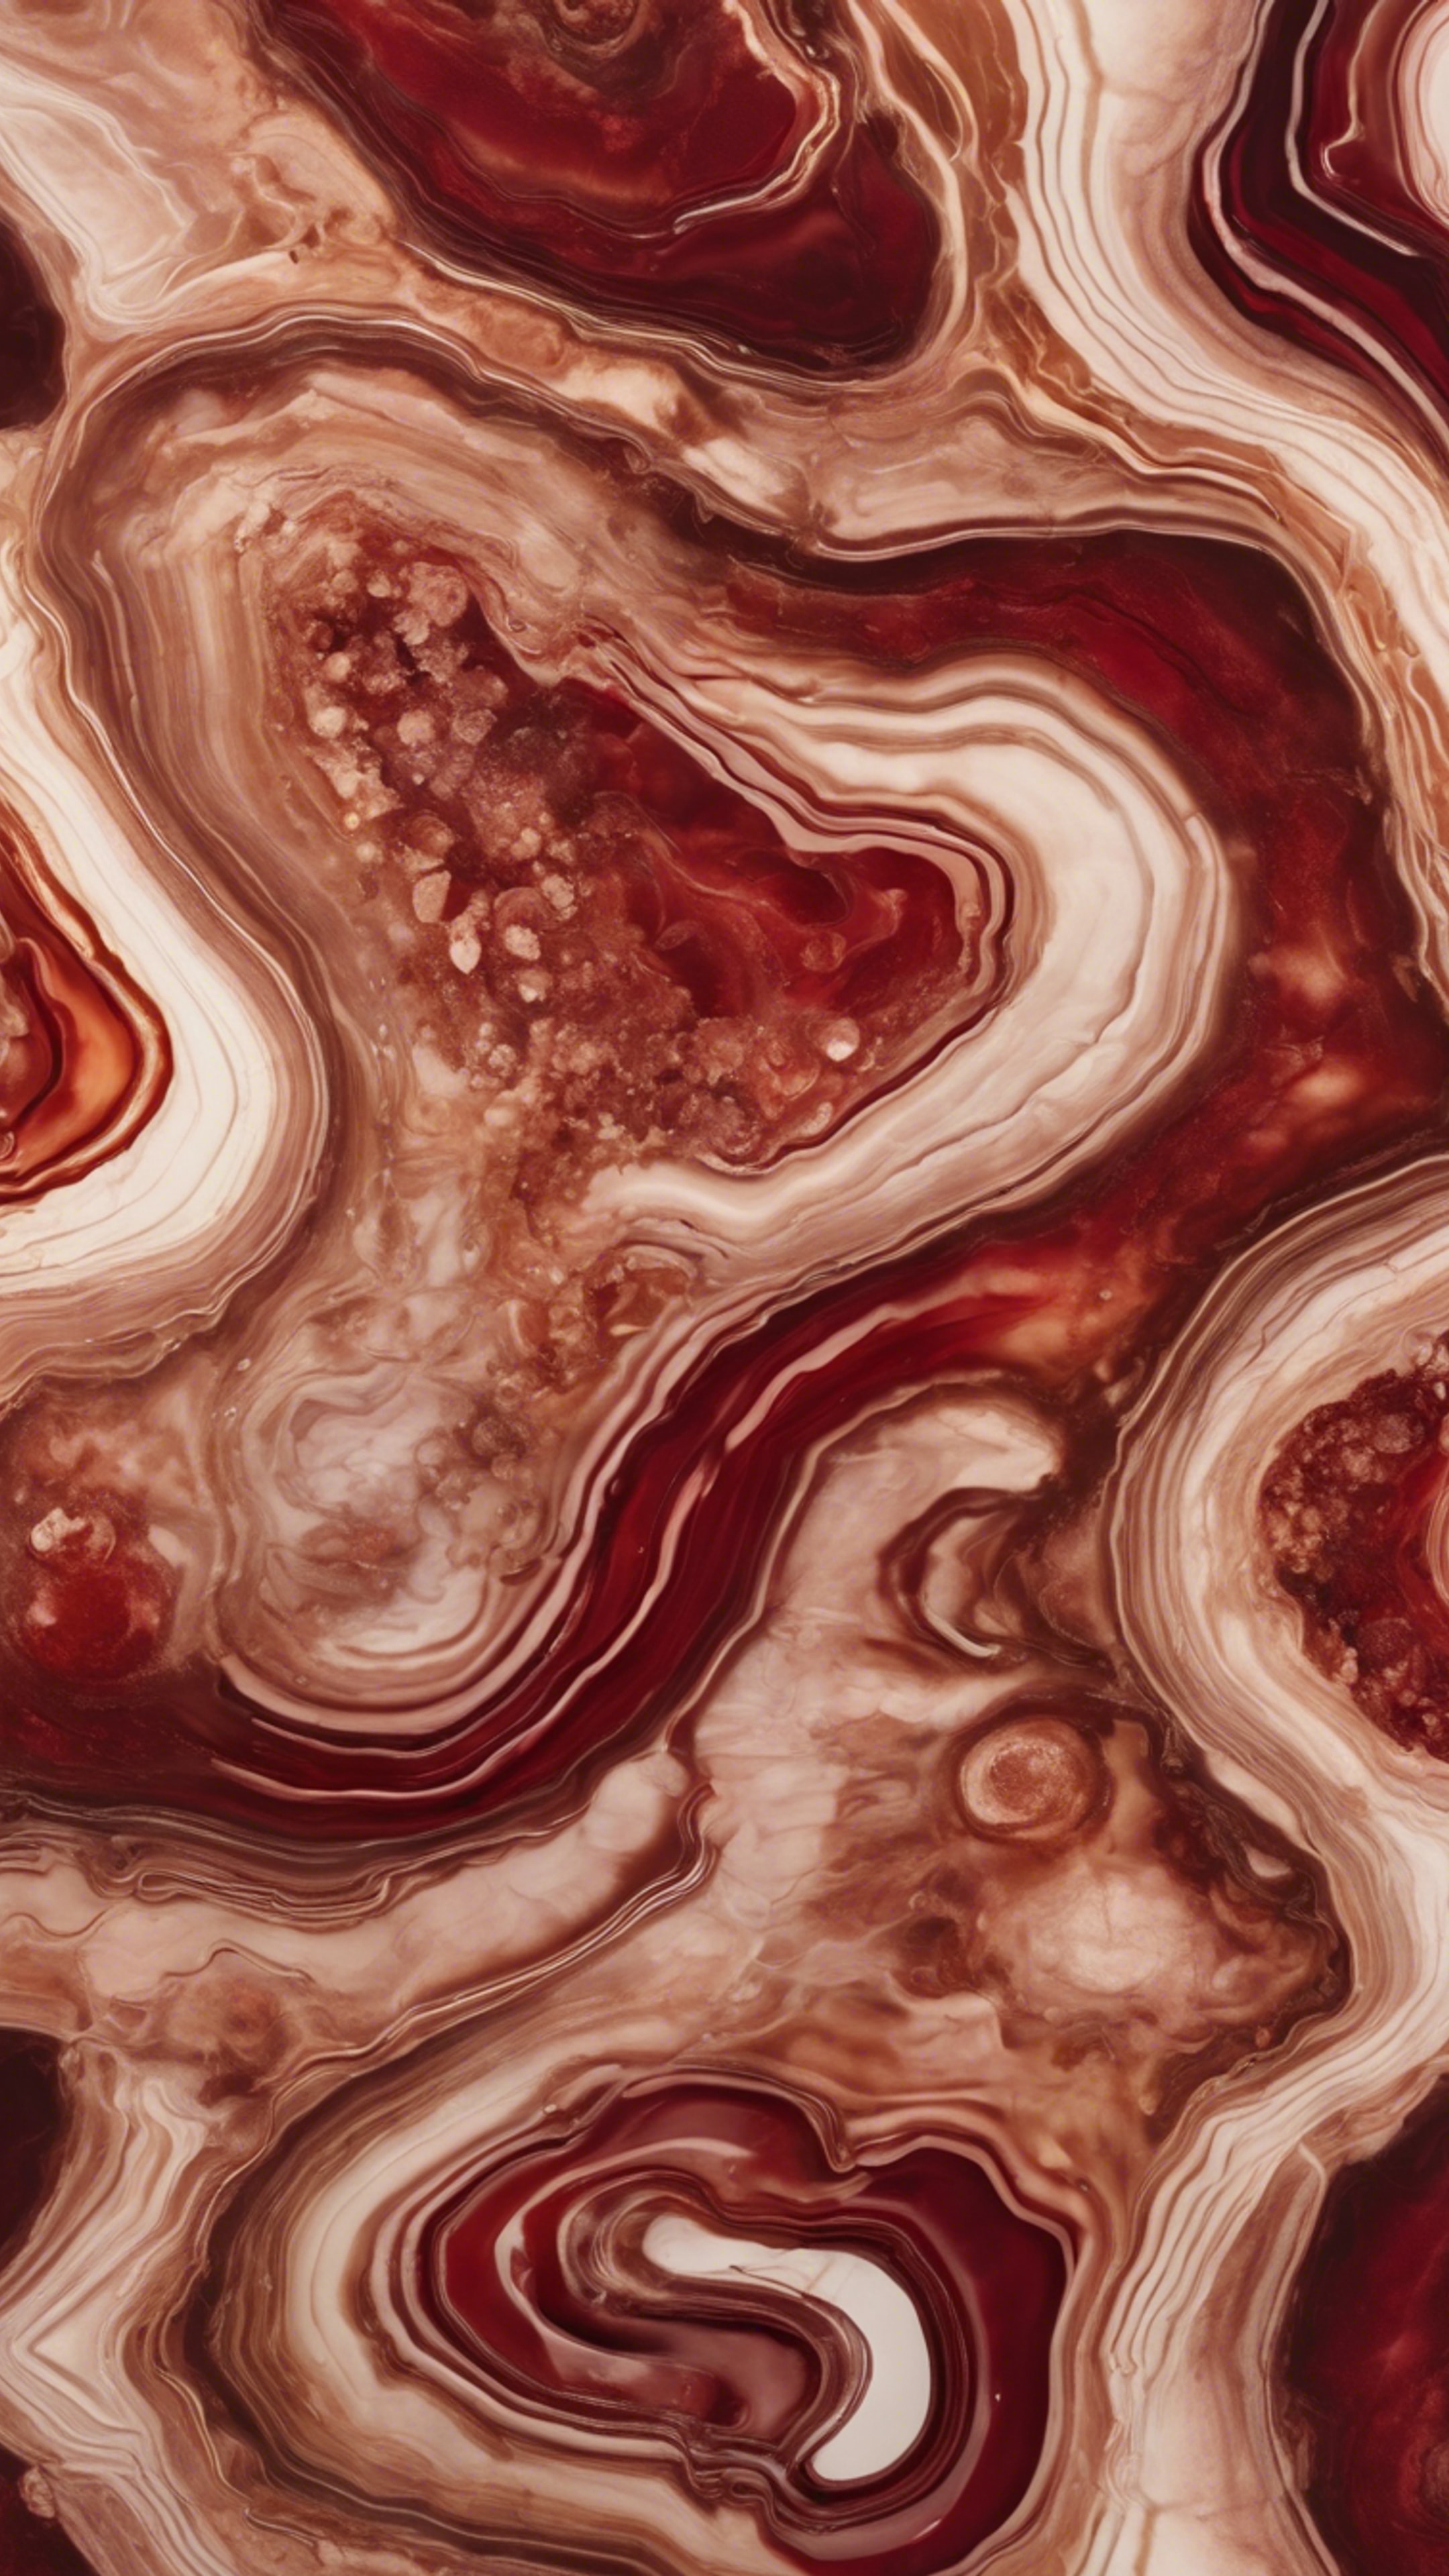 Grungy agate swirls in garnet red and sepia tones, forming a fascinating, abstract pattern. טפט[bb48f1c473e4473bbd4a]